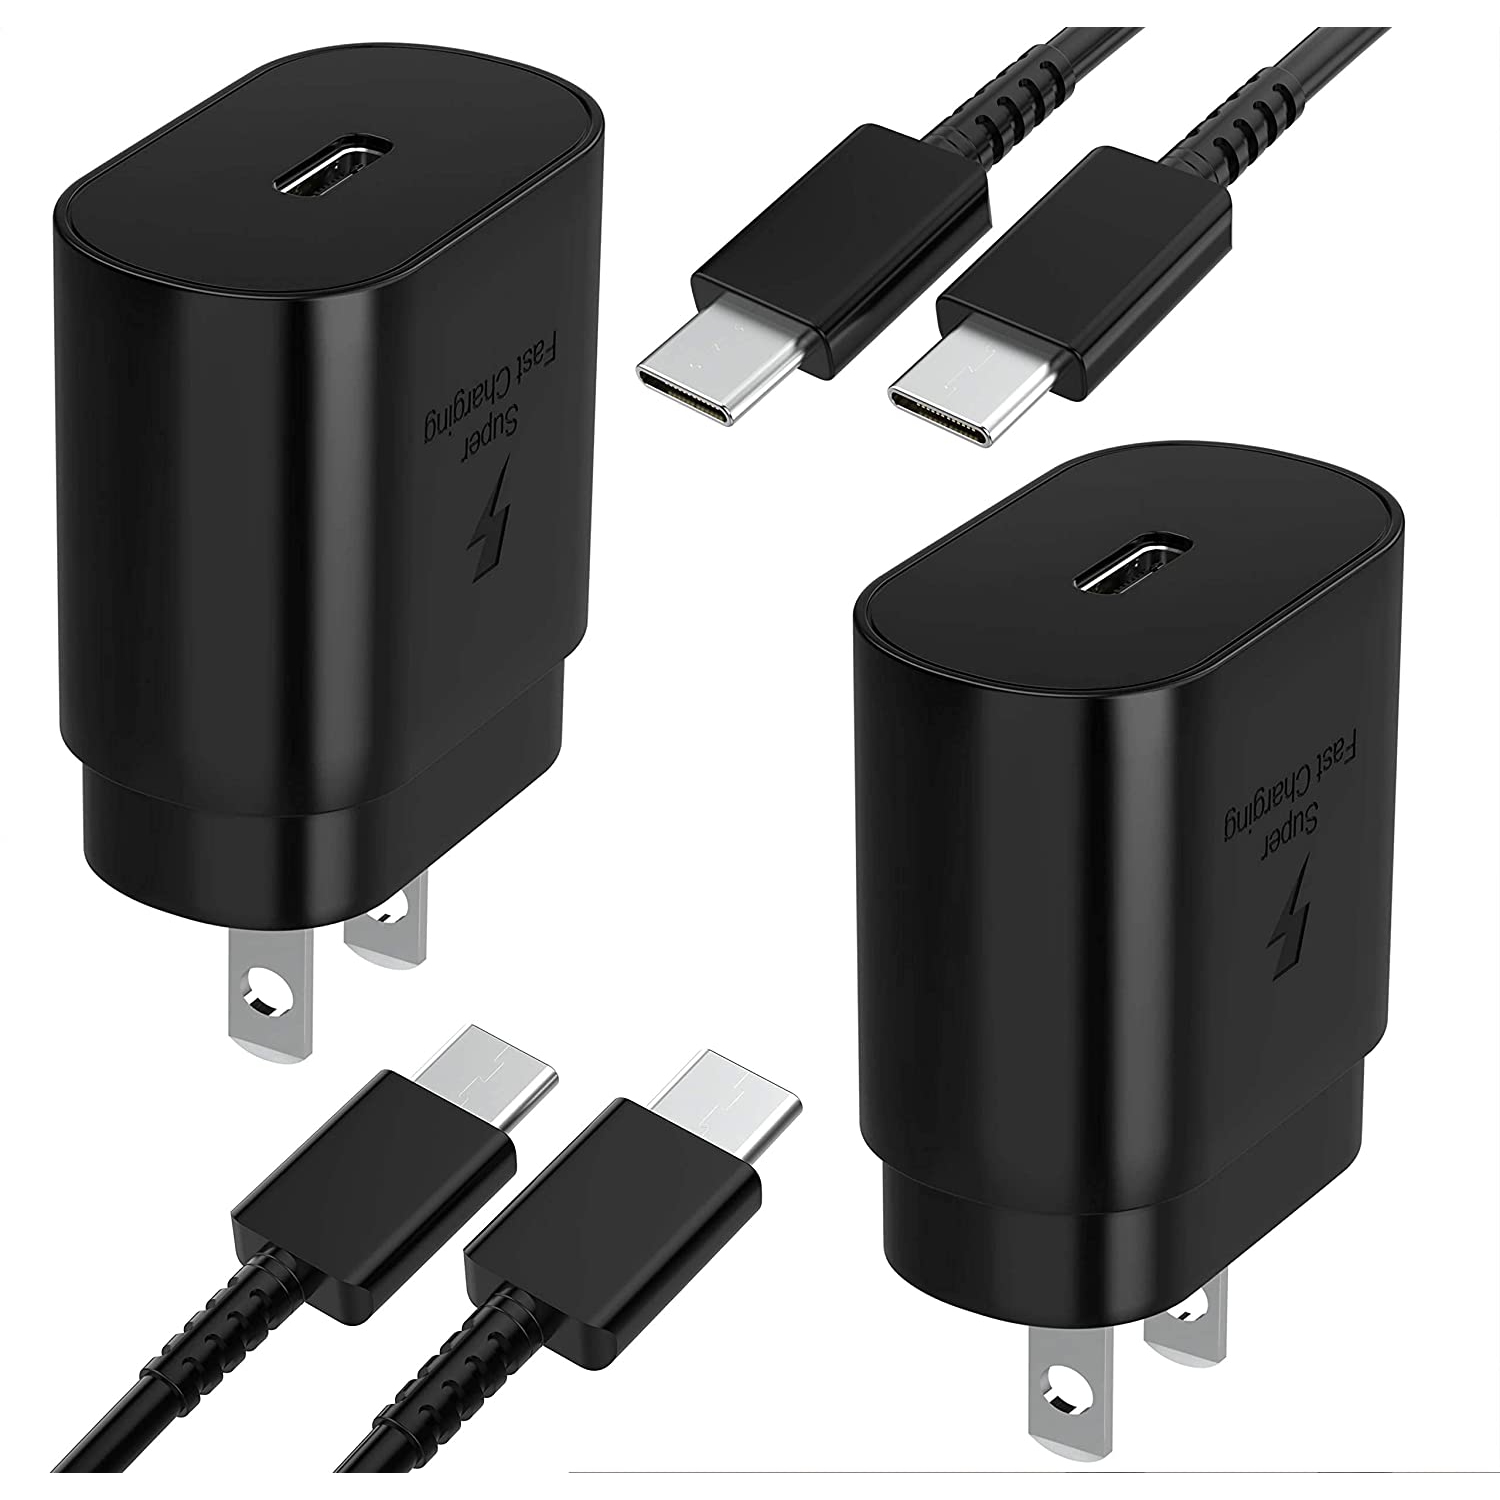 2 Pack - USB C Charger, Fast Wall Charger for Samsung Galaxy Note10/ 10+/ S20/ S10 5G Model, 2018 iPad Pro 11/12.9, Galaxy S21/S20/S10/ S9/ S8/ Plus, Google Pixel 4/ 4XL/ 3/ 3XL/ 3a/ 2/ 2XL and More